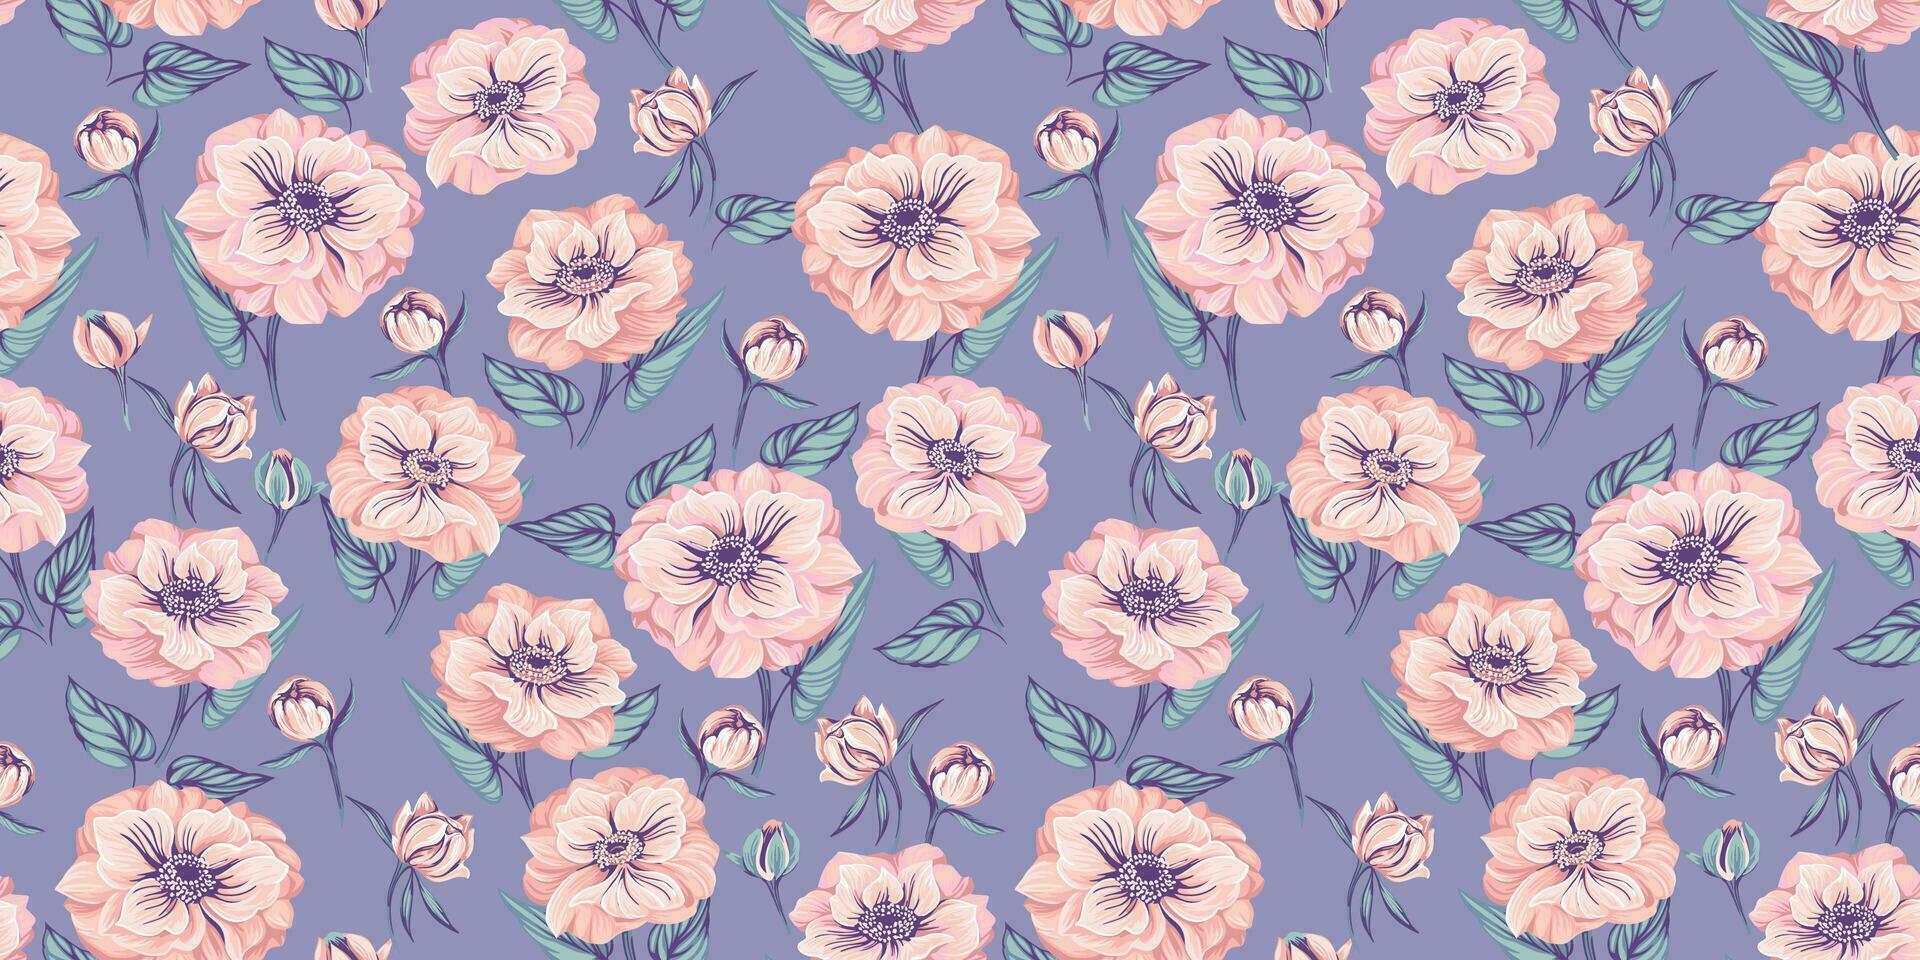 Seamless pattern with elegant spring flowers ranunculus. Globe flower vector hand drawn art. Pastel floral on the blue background. Design for fashion, fabric, wallpaper.